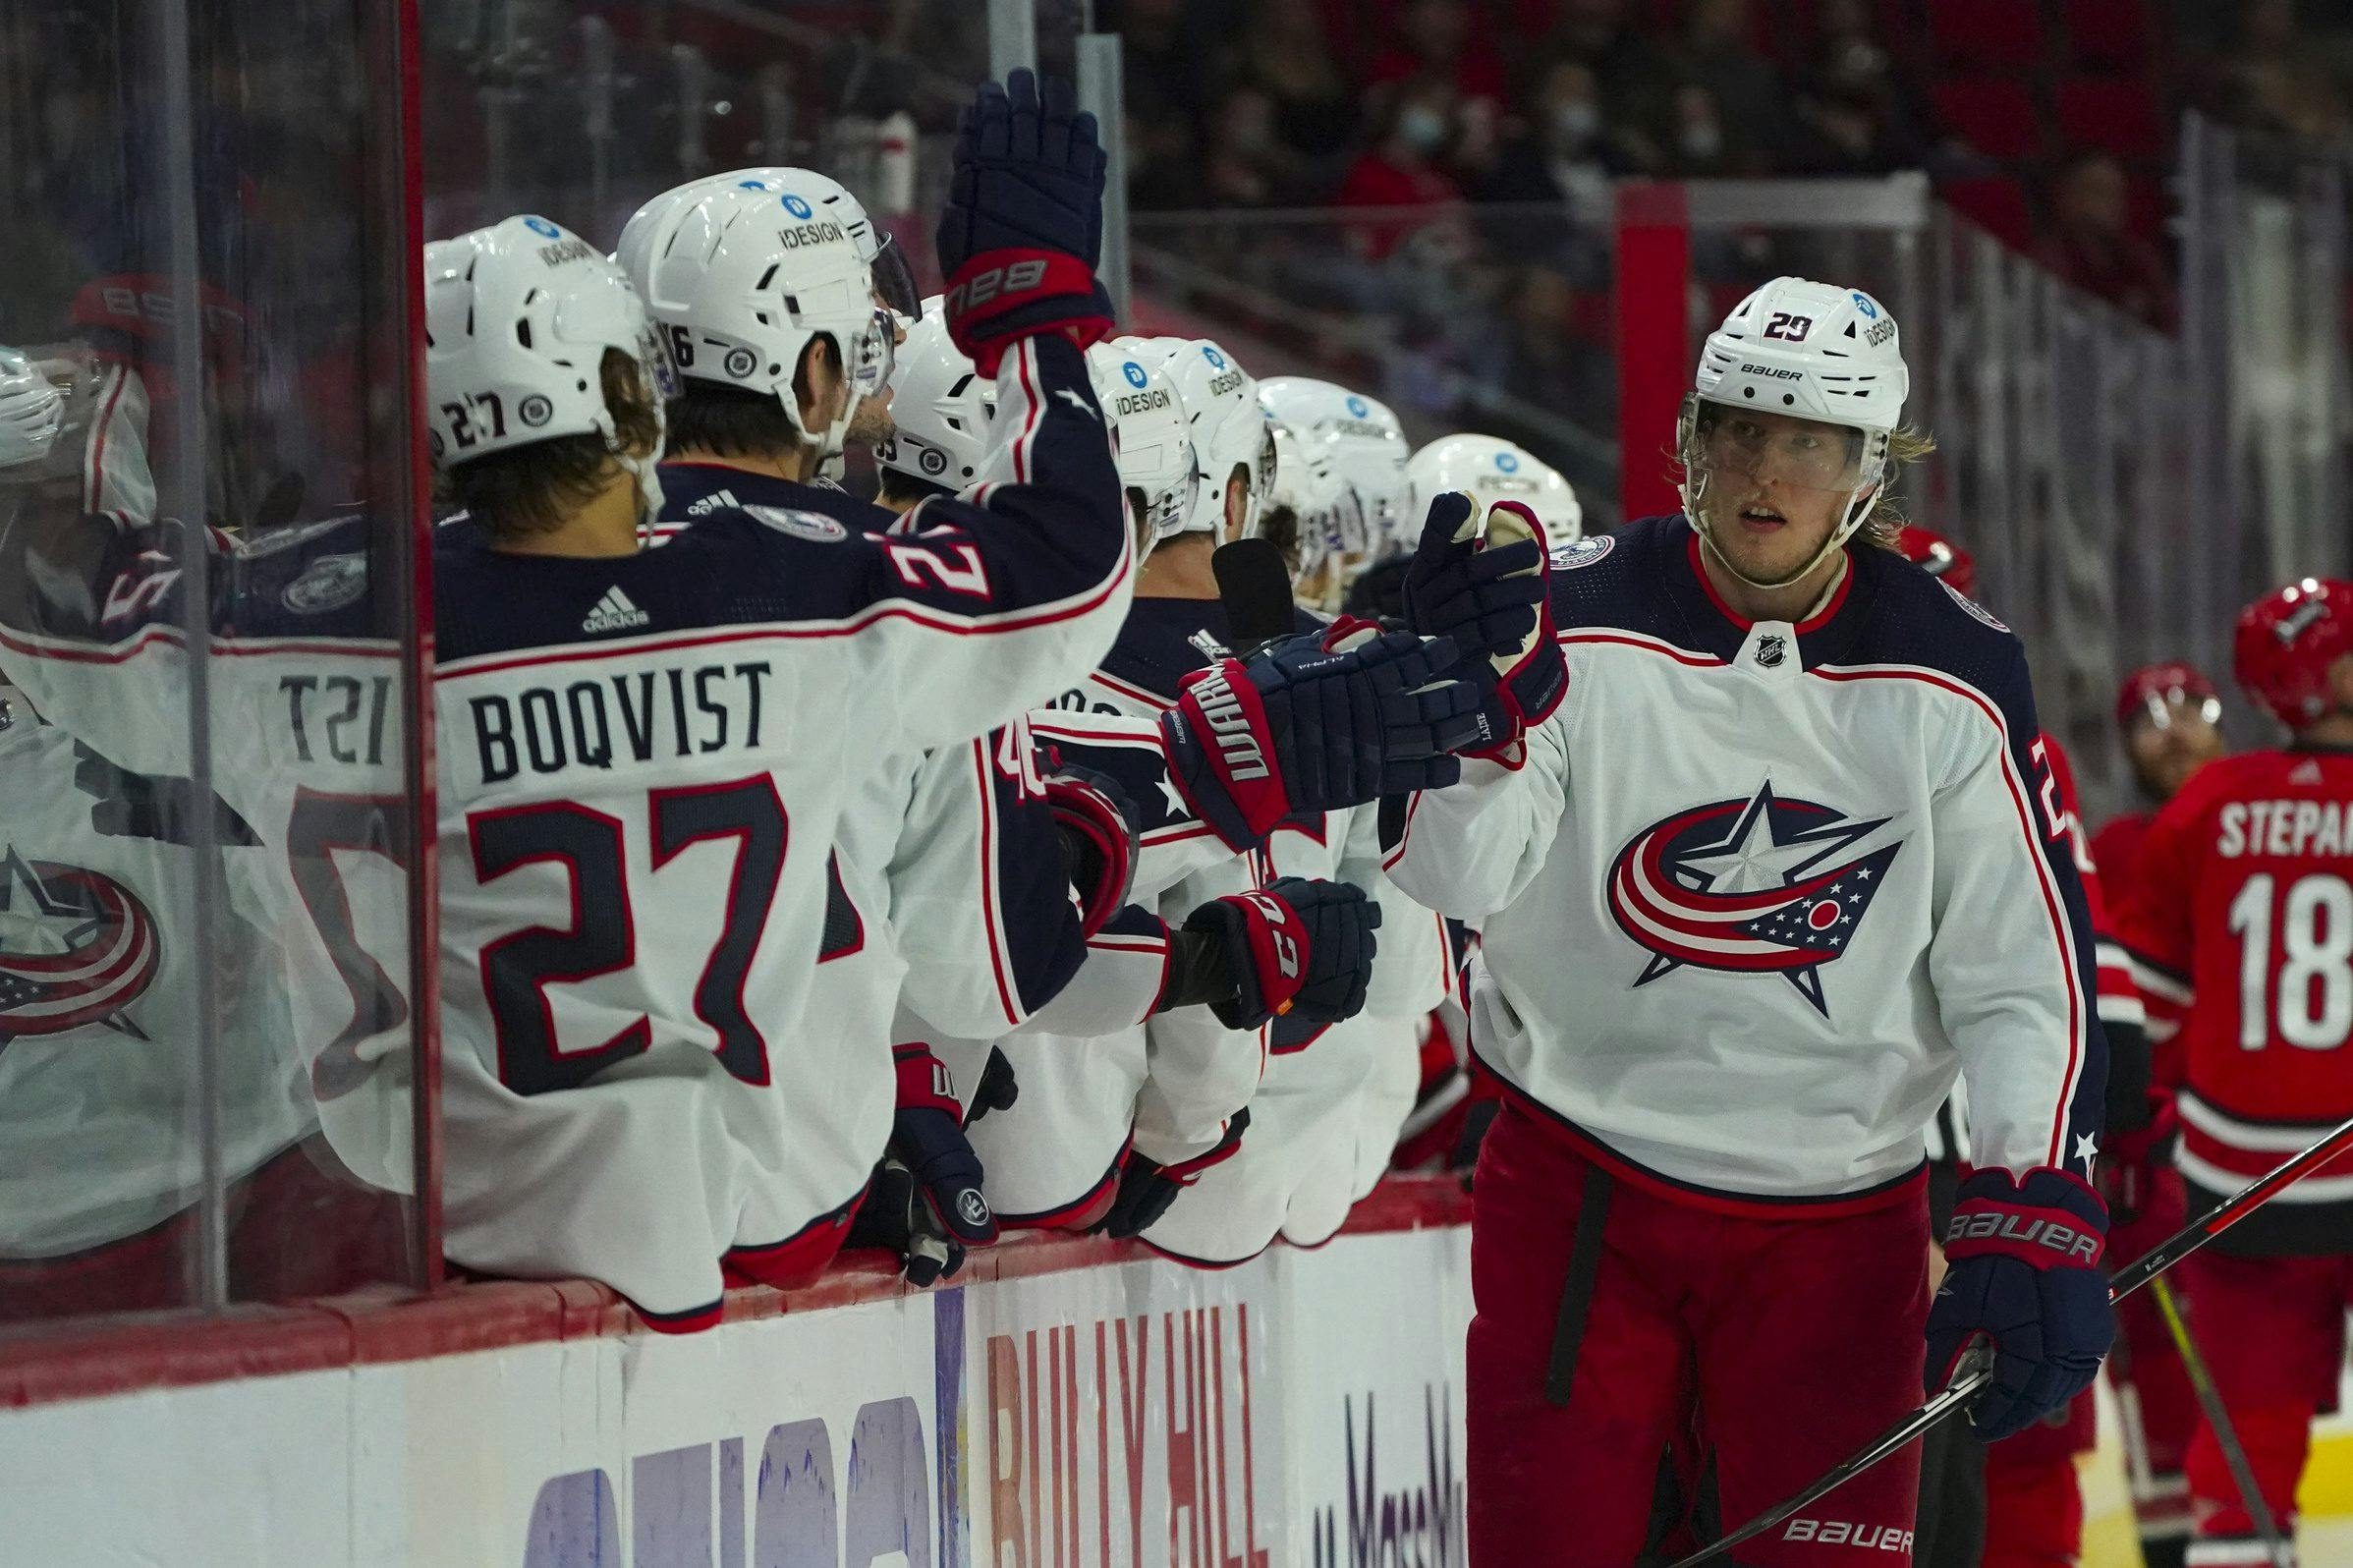 Columbus Blue Jackets Suspend Bobrovsky; Team and Player to Meet Friday